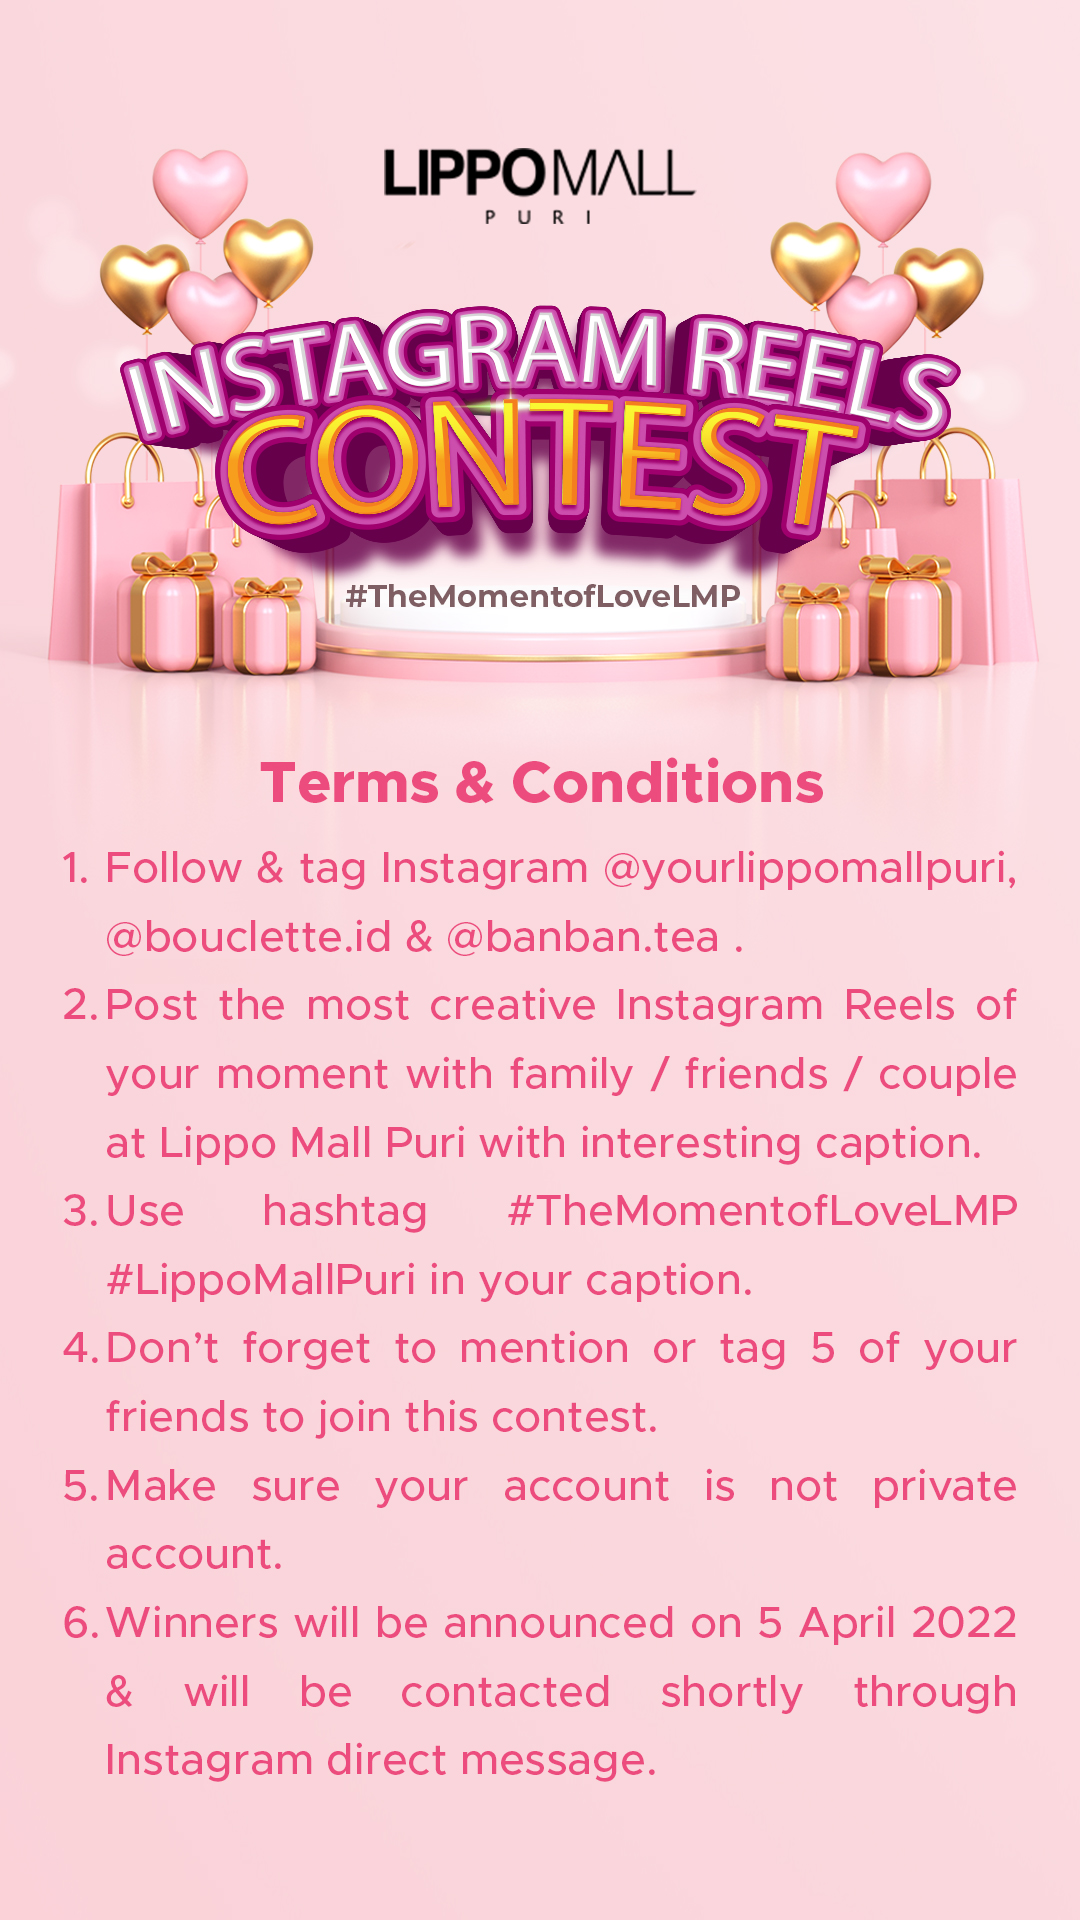 Instagram Reels Contest Terms & Conditions in lippo mall puri st. moritz